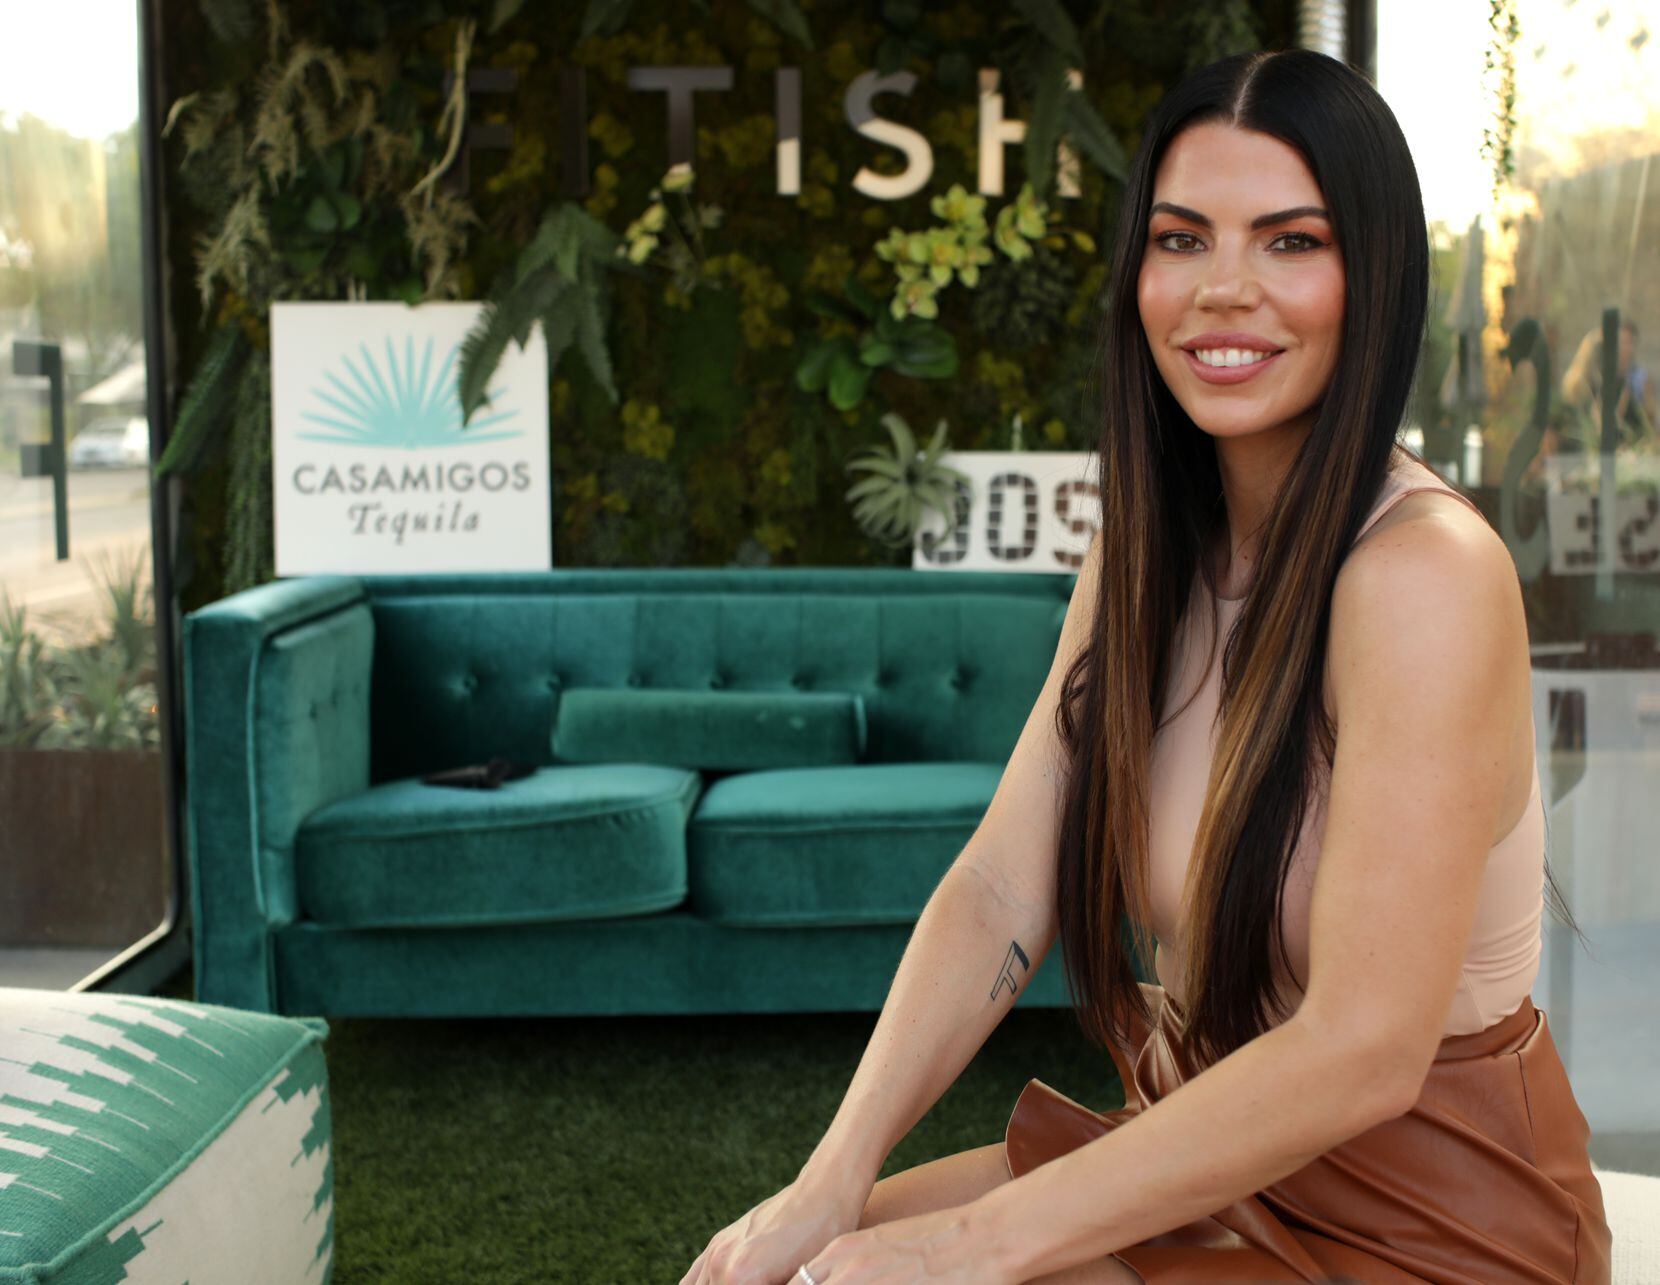 Jenna Owens photographed during a Fitish promotional event at Jose in Dallas, TX, on Oct. 3, 2019. (Jason Janik/Special Contributor)